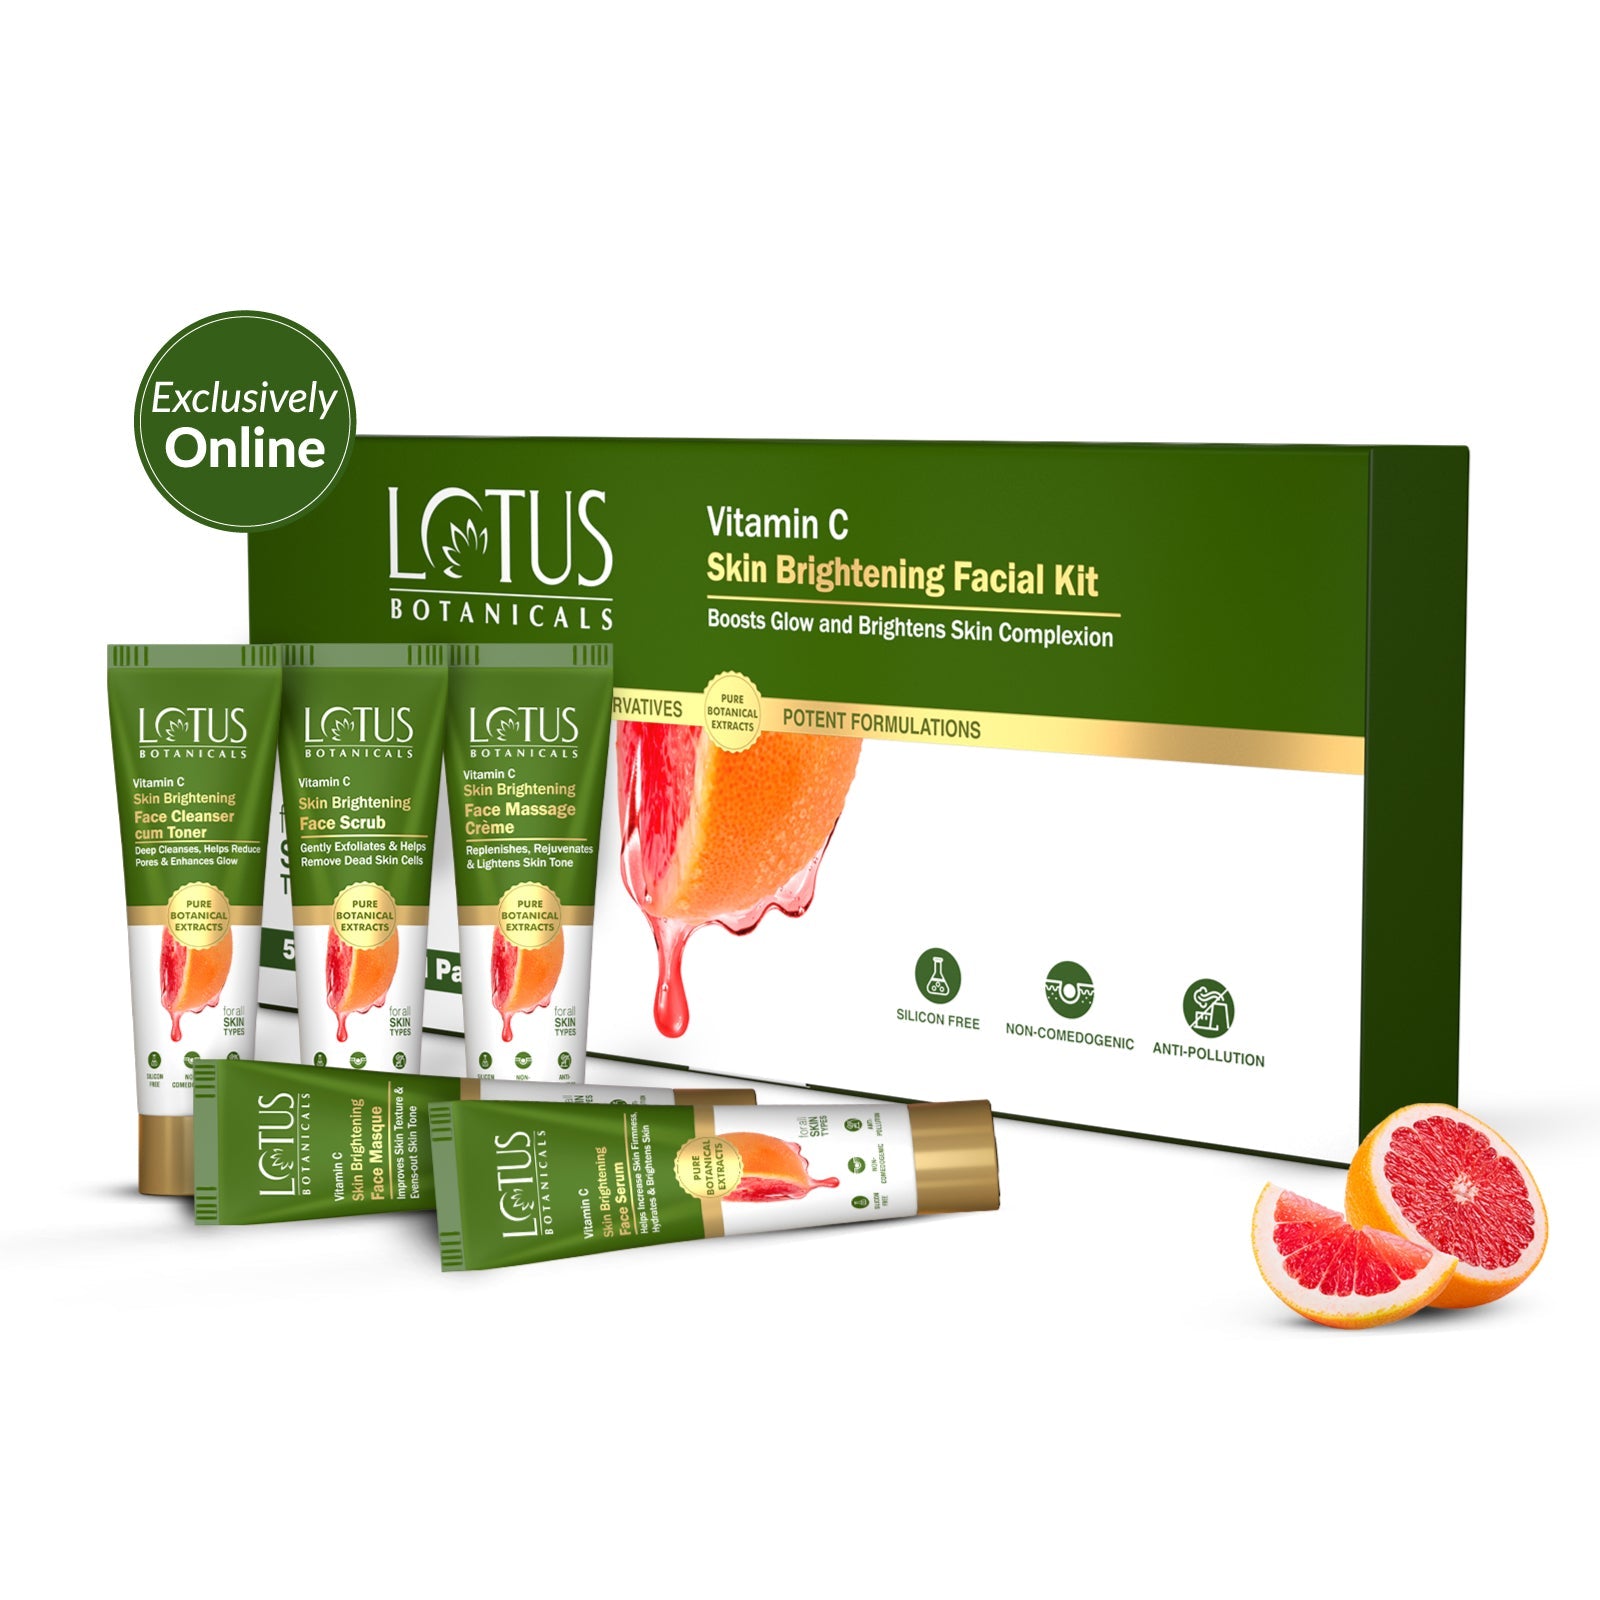 Vitamin C Skin Brightening Facial Kit - Enrich your skin with the power of Vitamin C for a radiant and glowing complexion